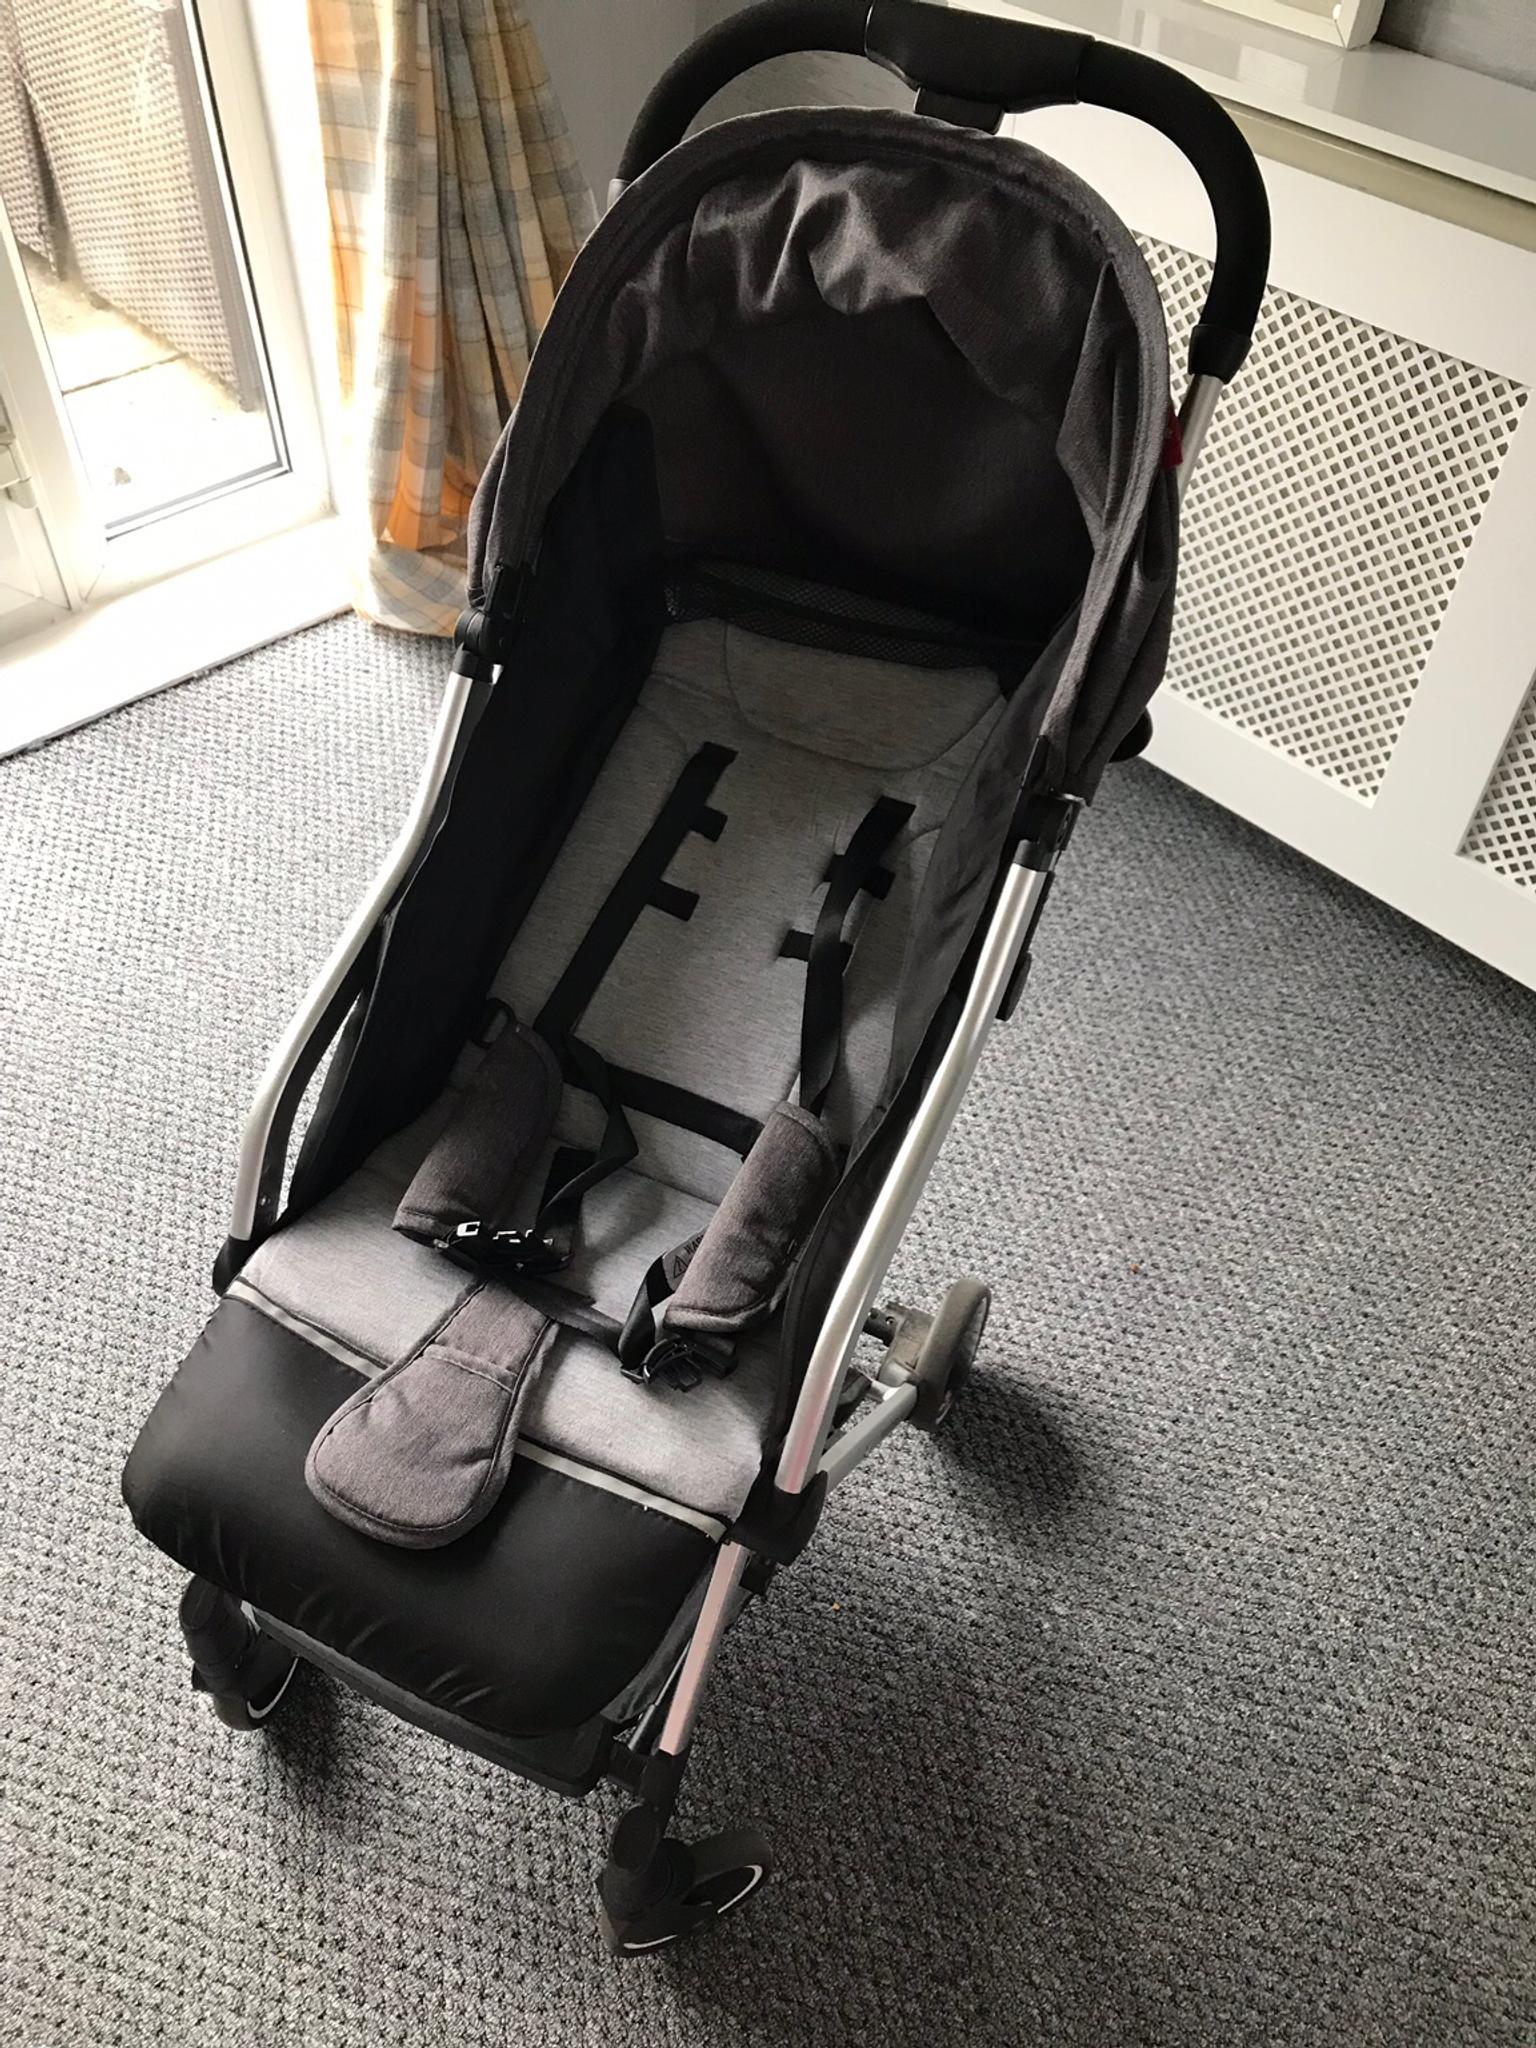 babylo explorer xs compact stroller review